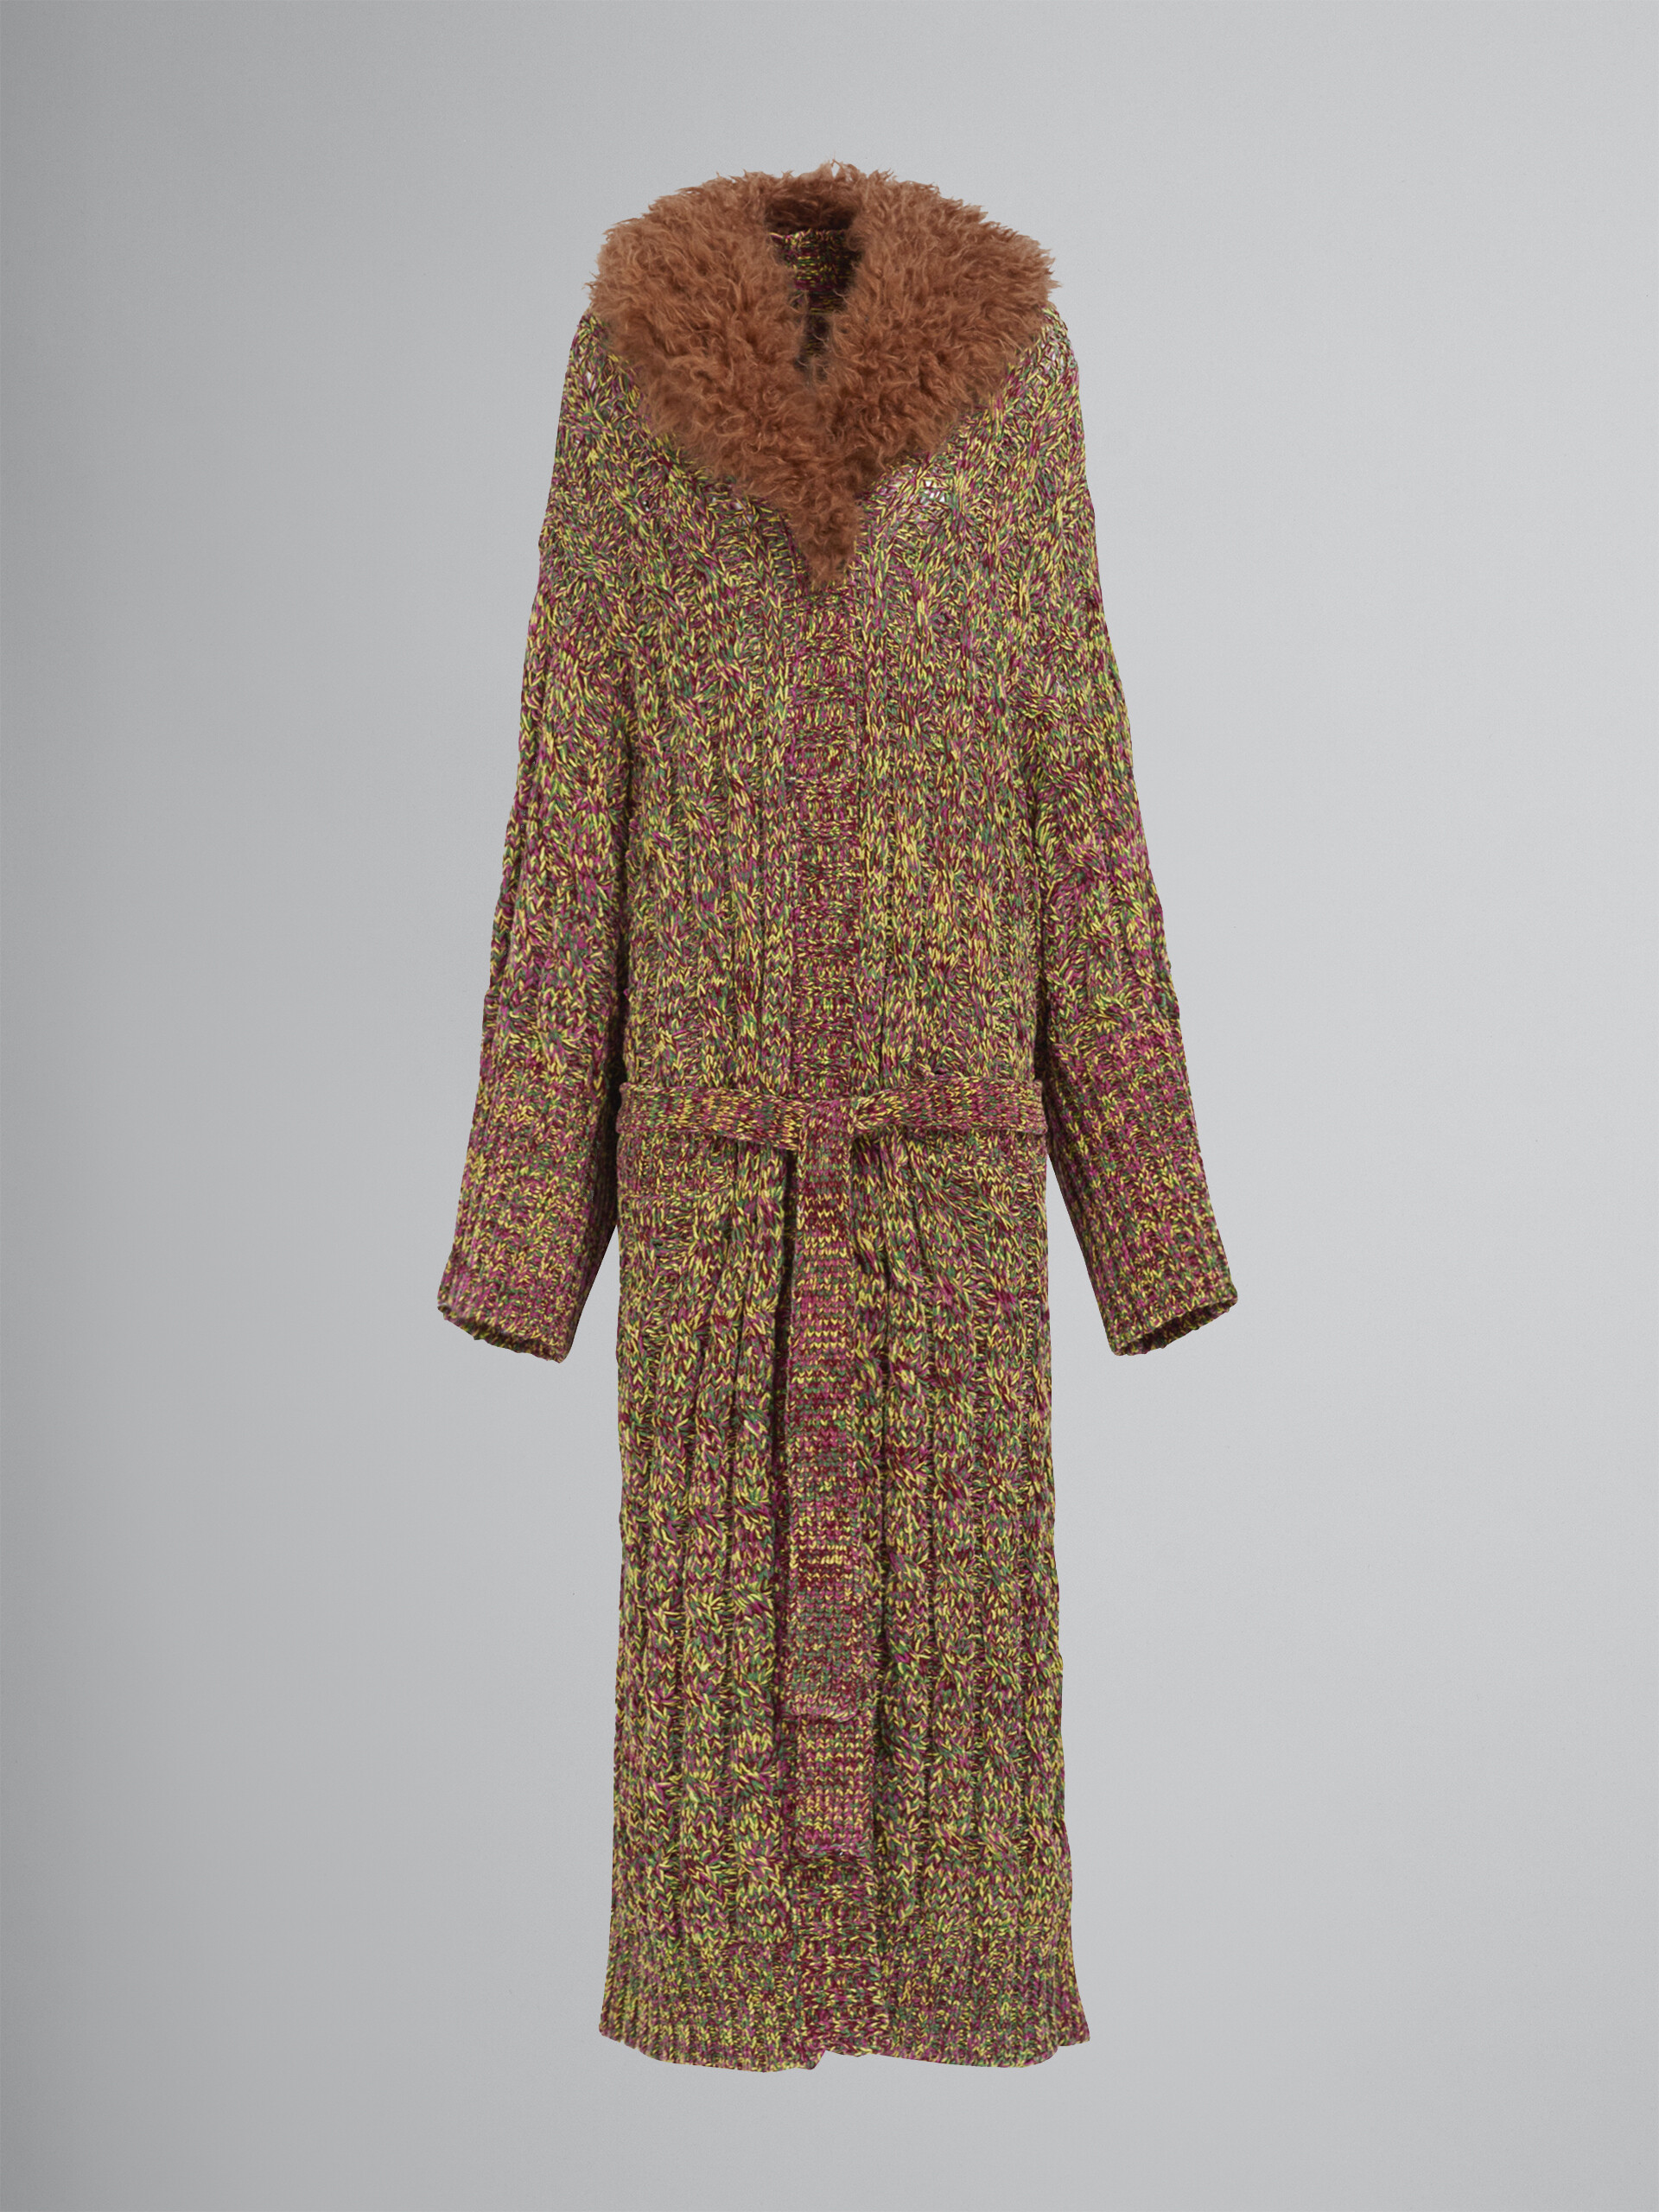 Viscose and cotton chenille long cardigan - Pullovers - Image 1